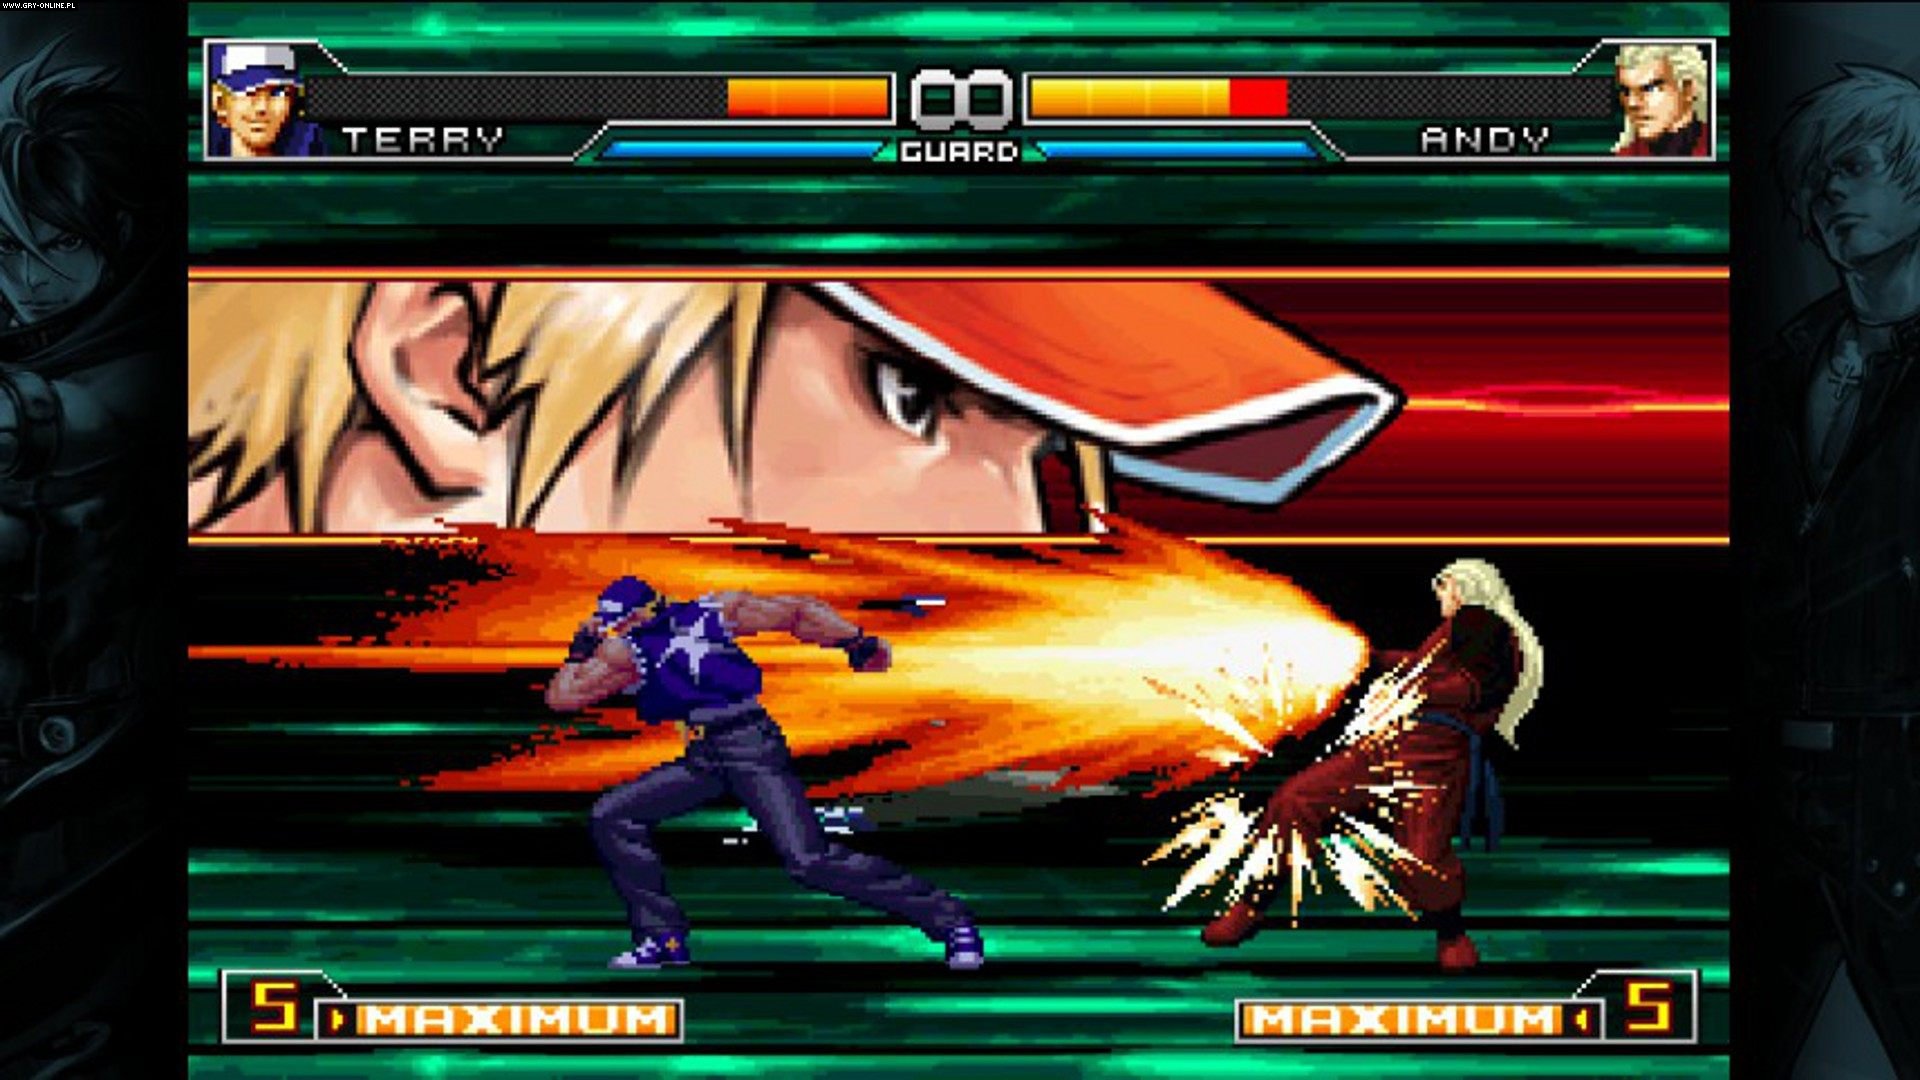 the king of fighters 2002 unlimited match ps2 download